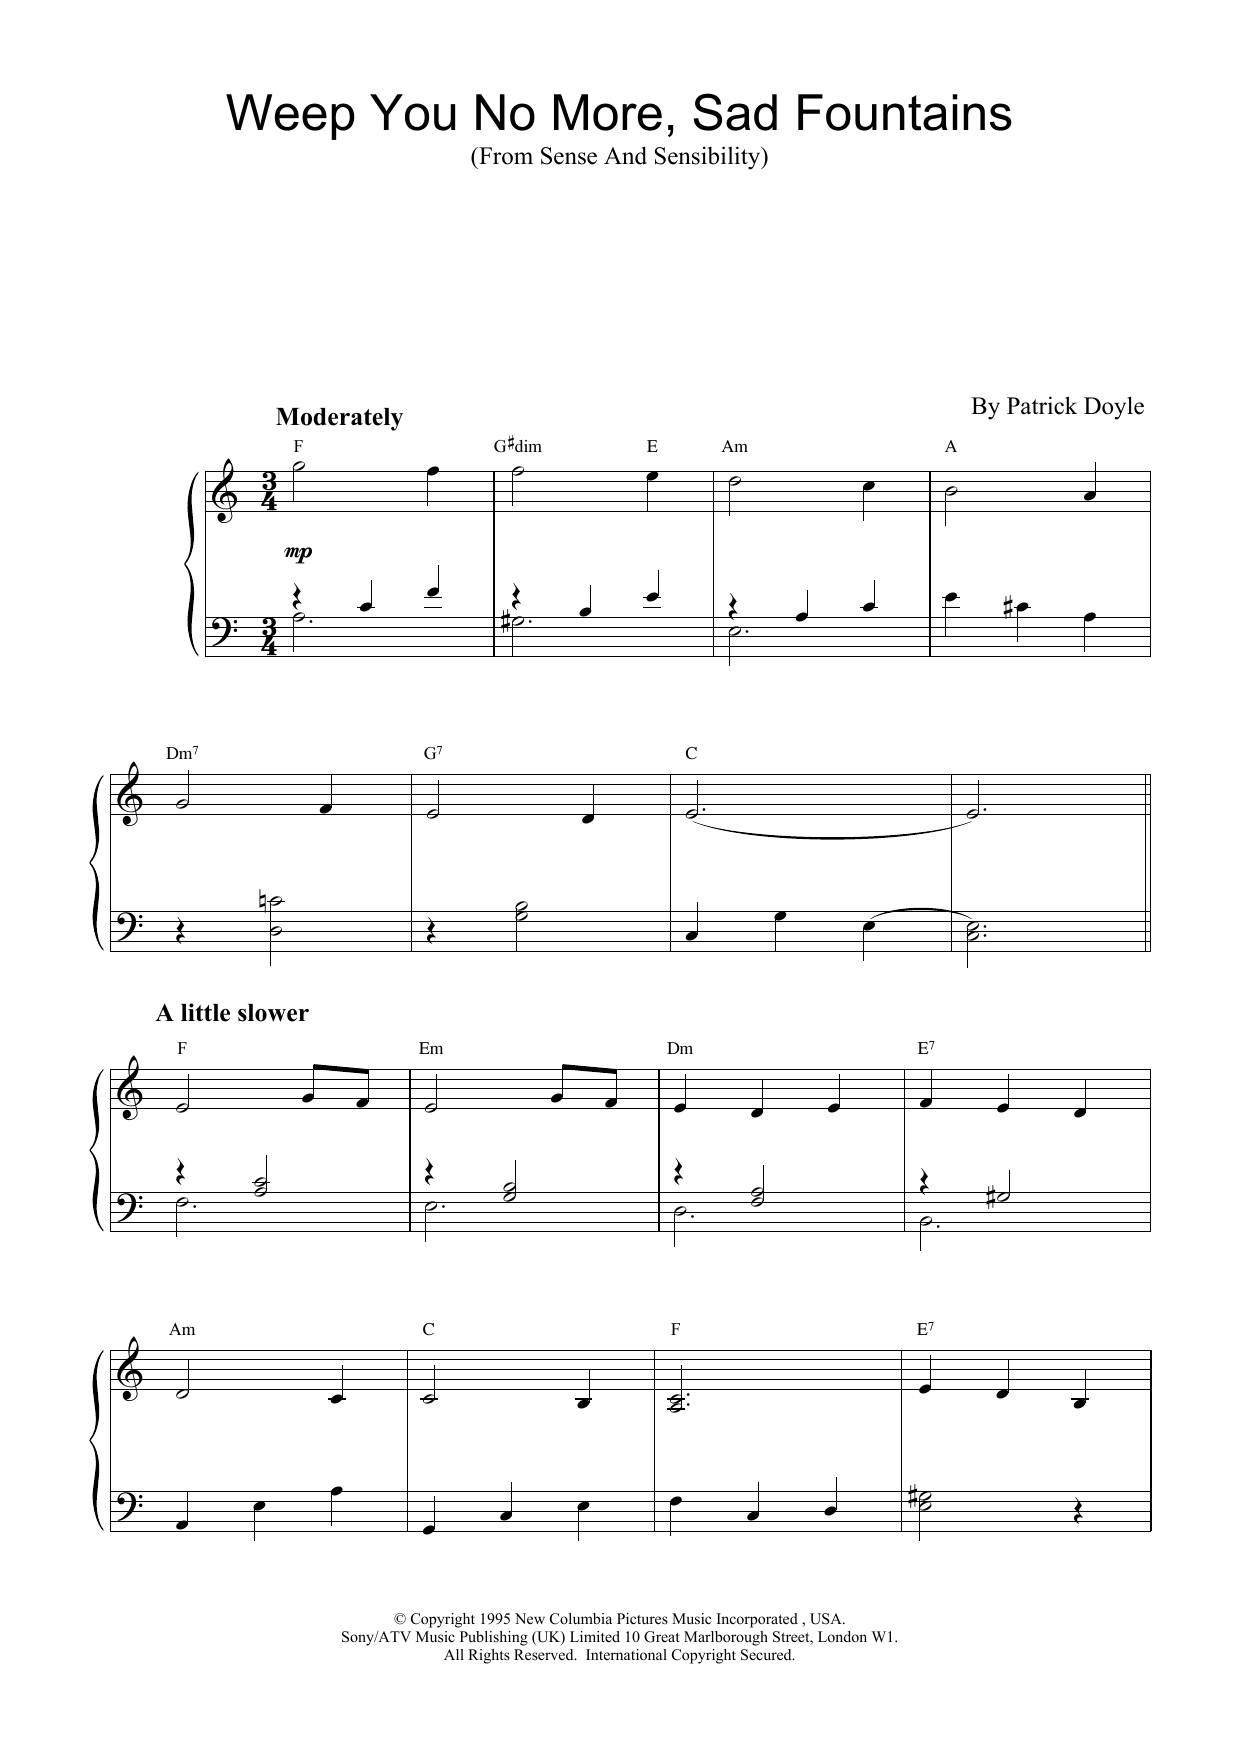 Patrick Doyle Weep You No More, Sad Fountains (from Sense And Sensibility) sheet music preview music notes and score for Piano including 3 page(s)